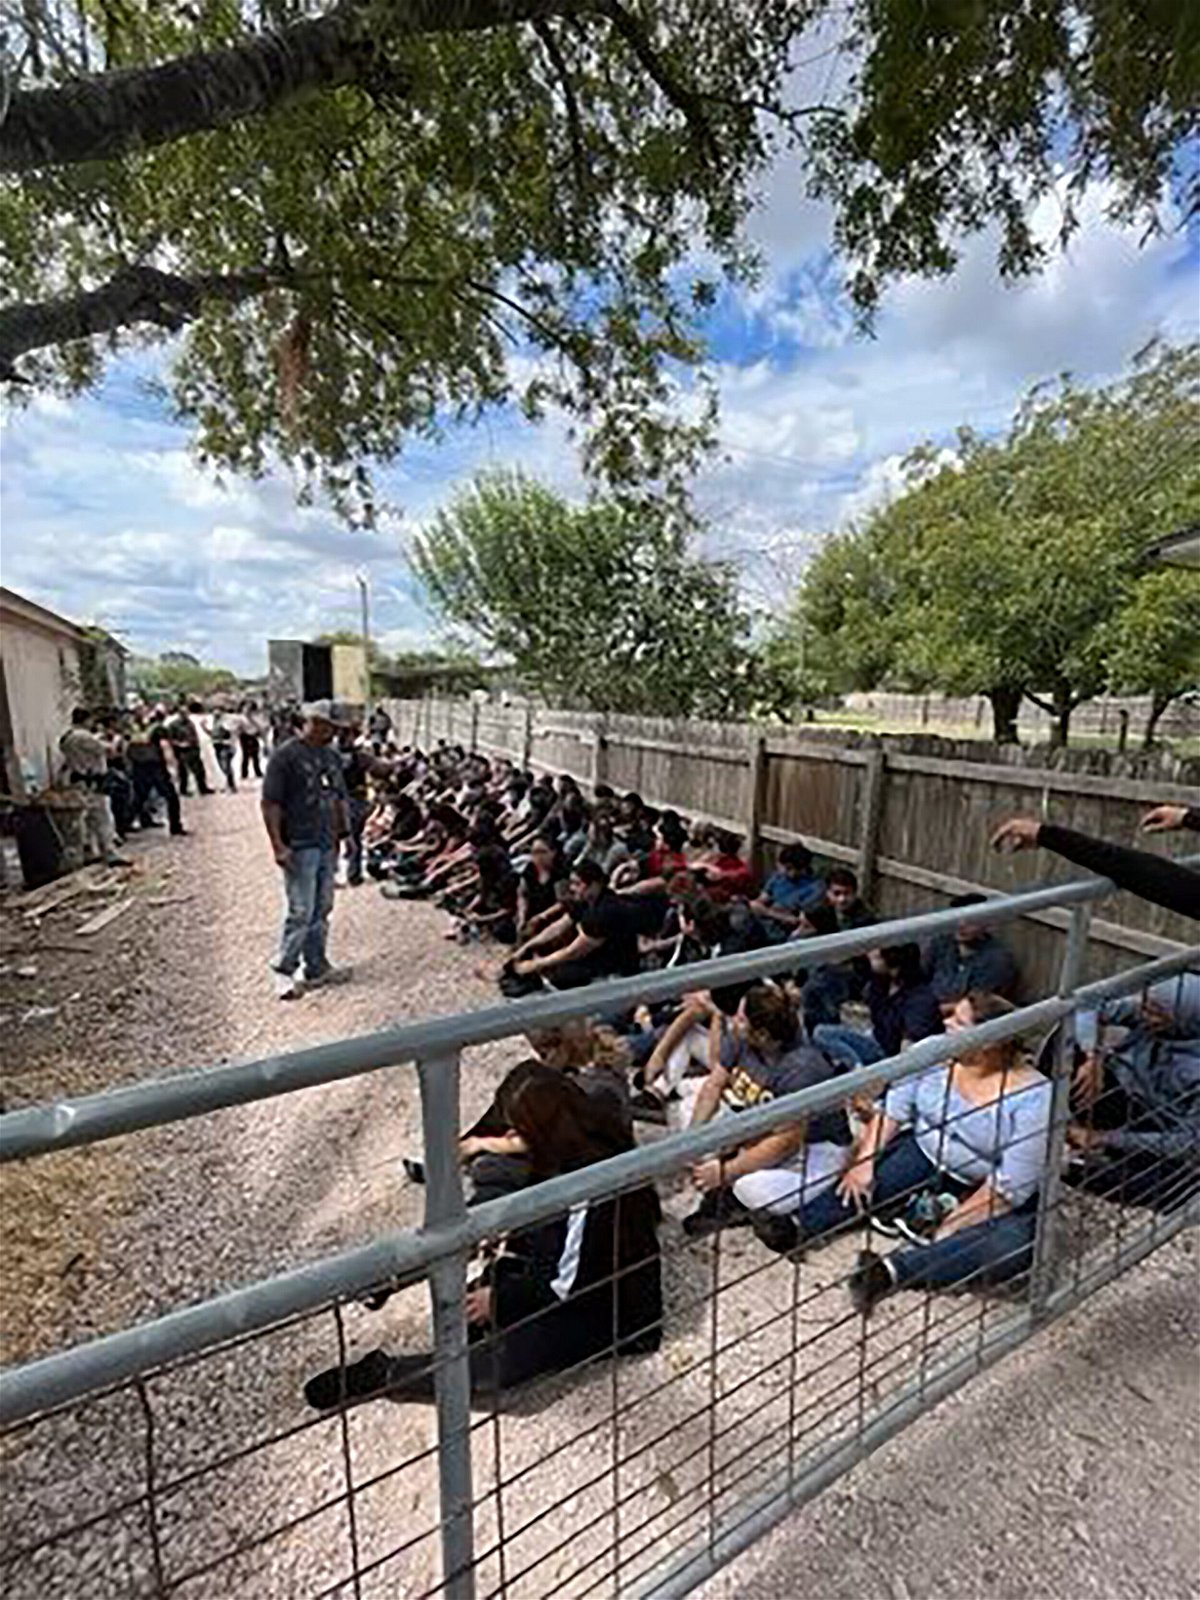 <i>N/A/Hidalgo County Sheriff Office/Hidalgo County Sheriff Office</i><br/>Eighty-four undocumented migrants have been rescued from a semi-truck in Southern Texas.